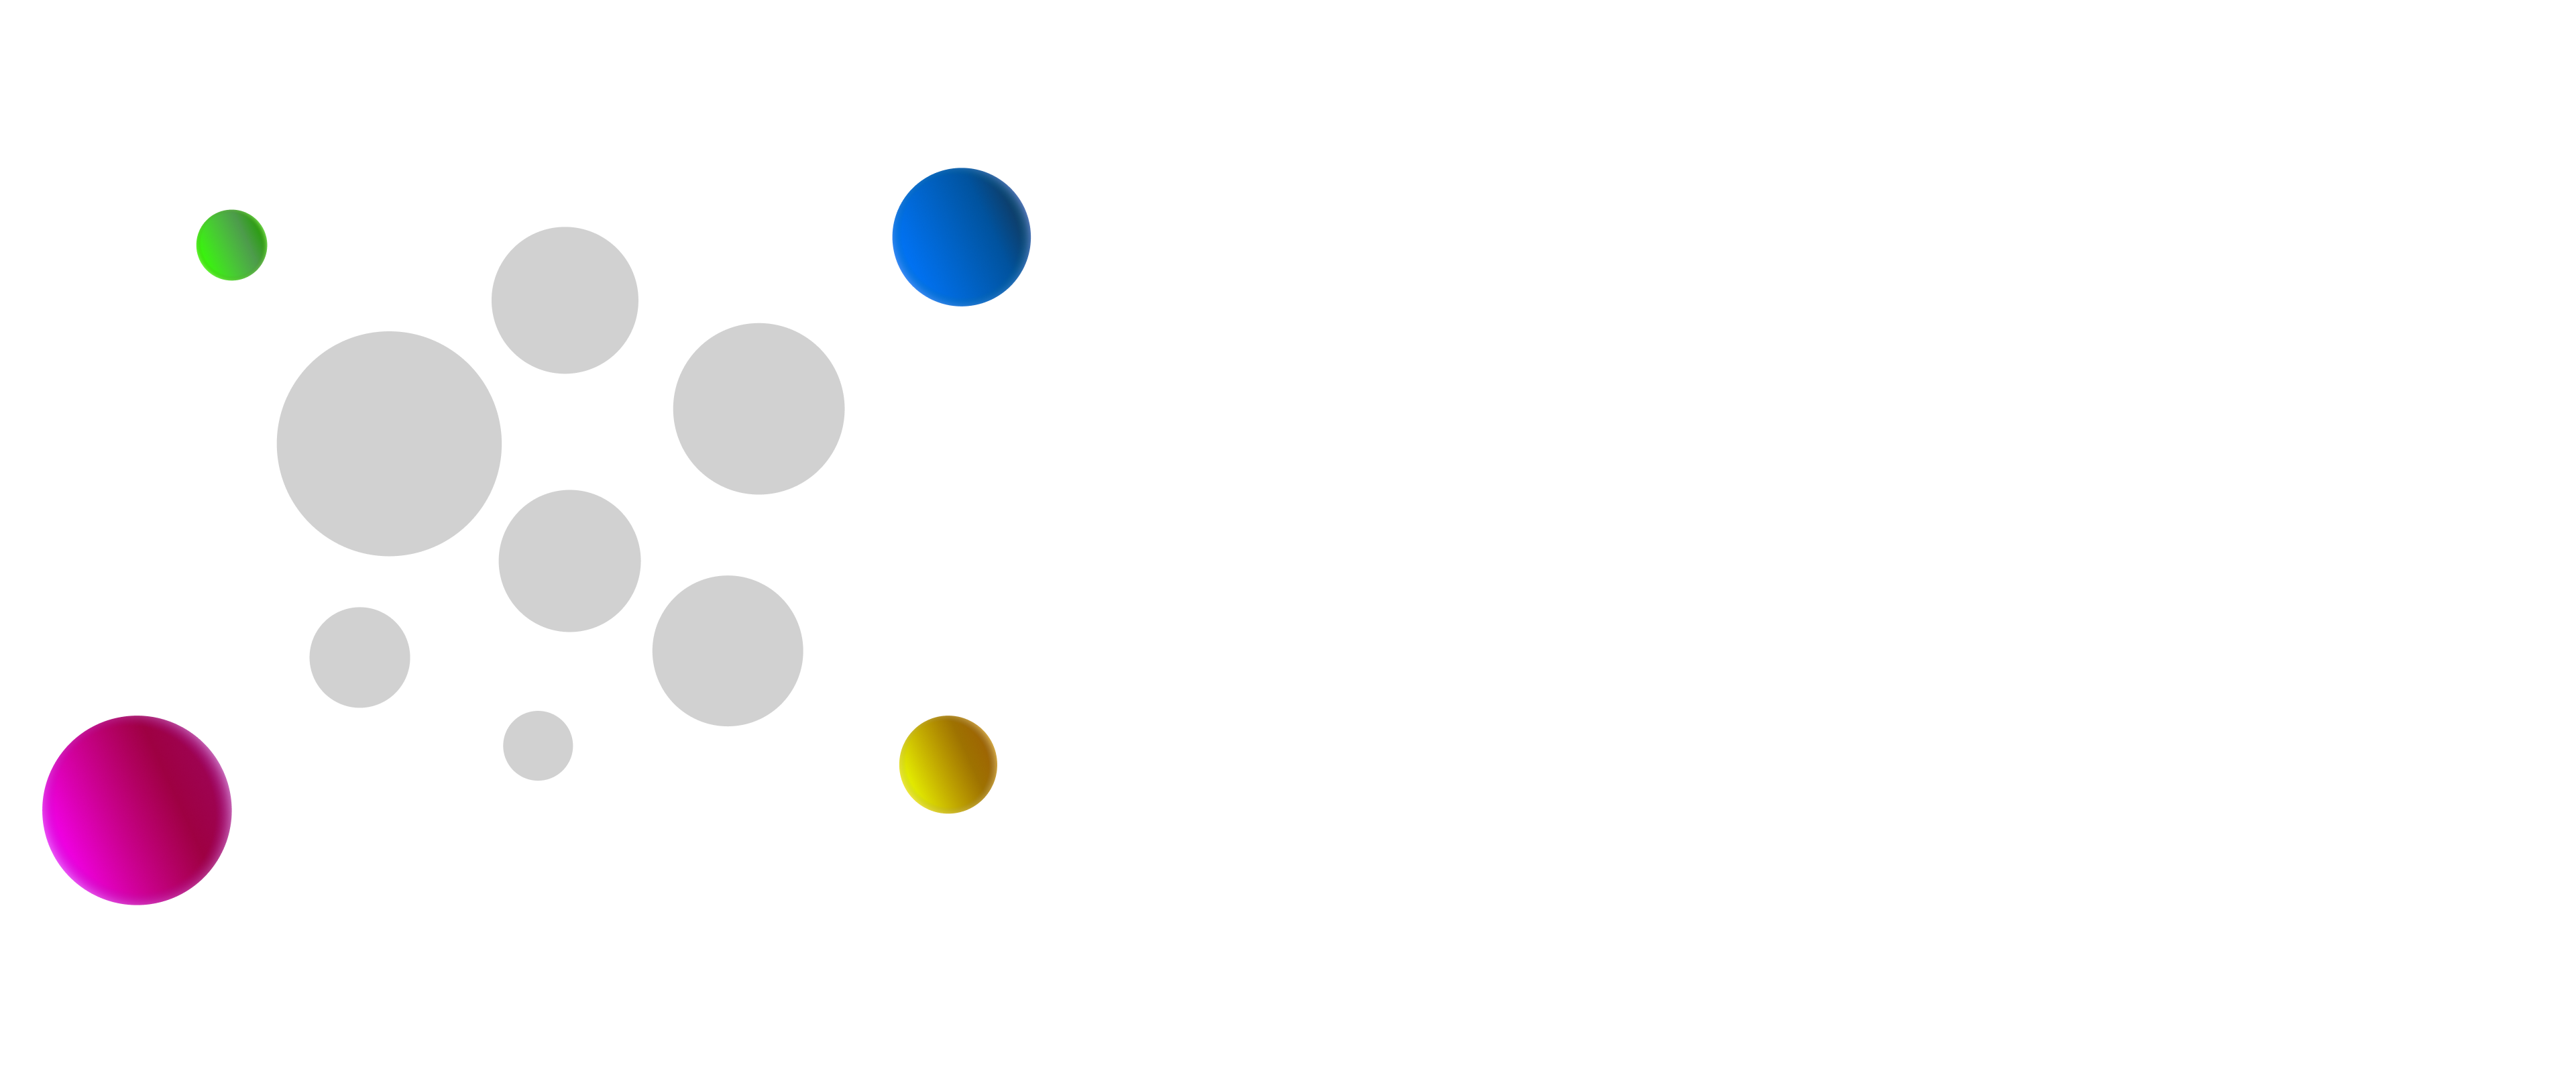 This image represents, more explicitly, exclusion. A light gray sphere, with darker spheres inside, is surrounded by coloured spheres. This represents a barrier for the coloured spheres to penetrate inside the light gray sphere.